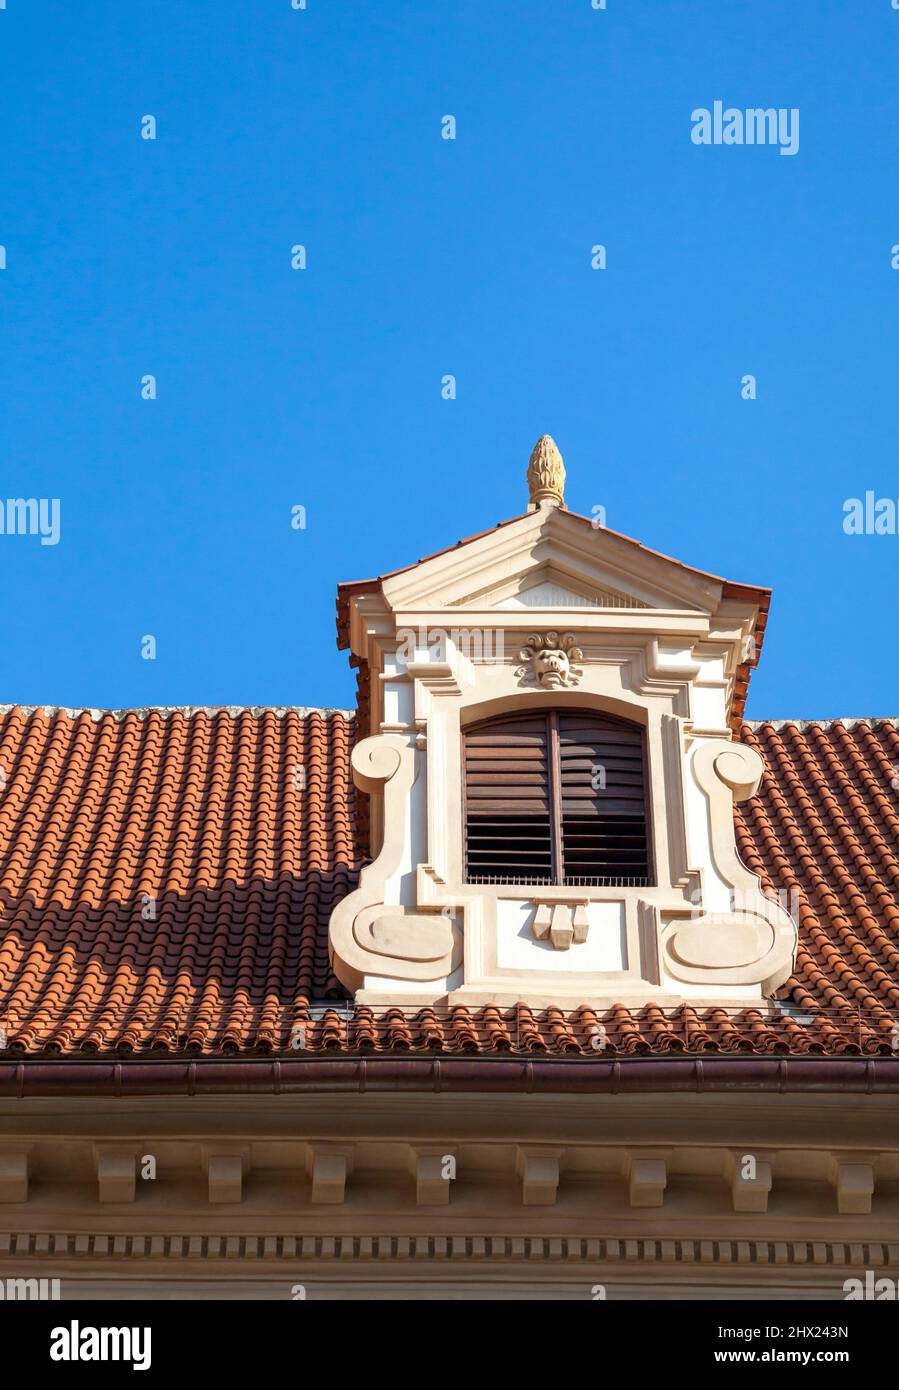 Dormer on a roof on a sunny day Stock Photo